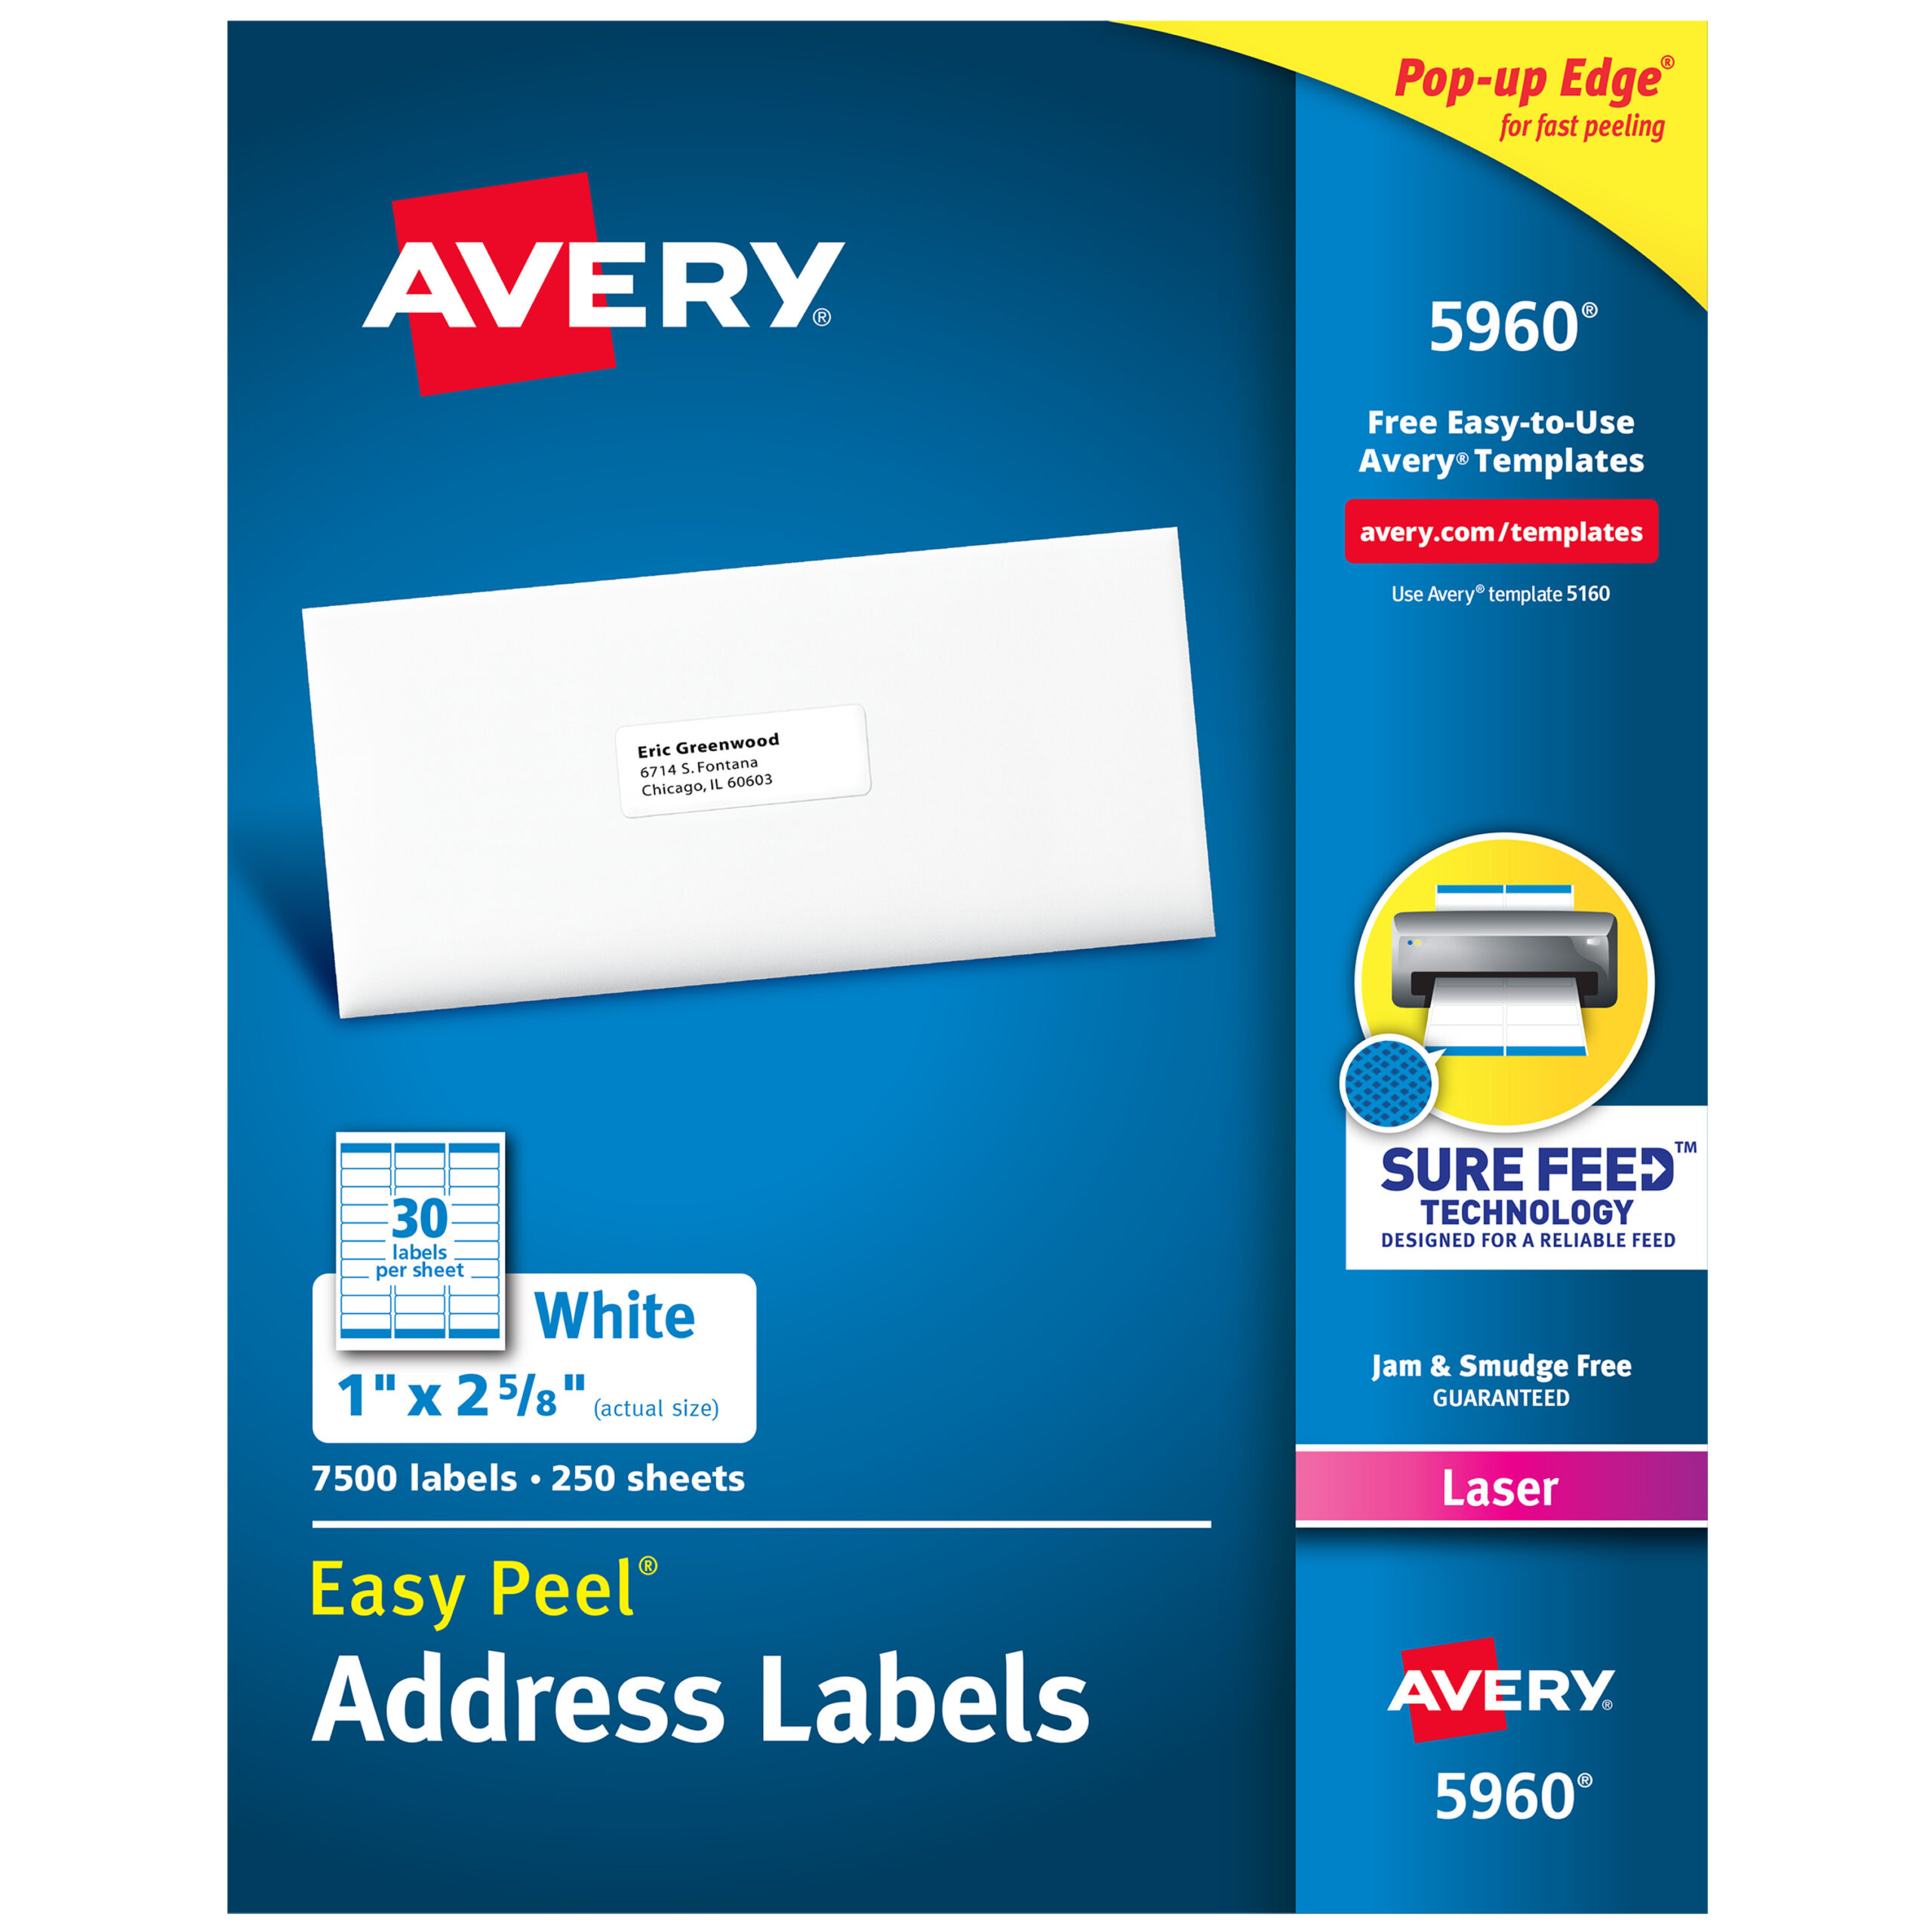 Avery Labels 5960 Colona.rsd7 In Office Depot Label Templates Best